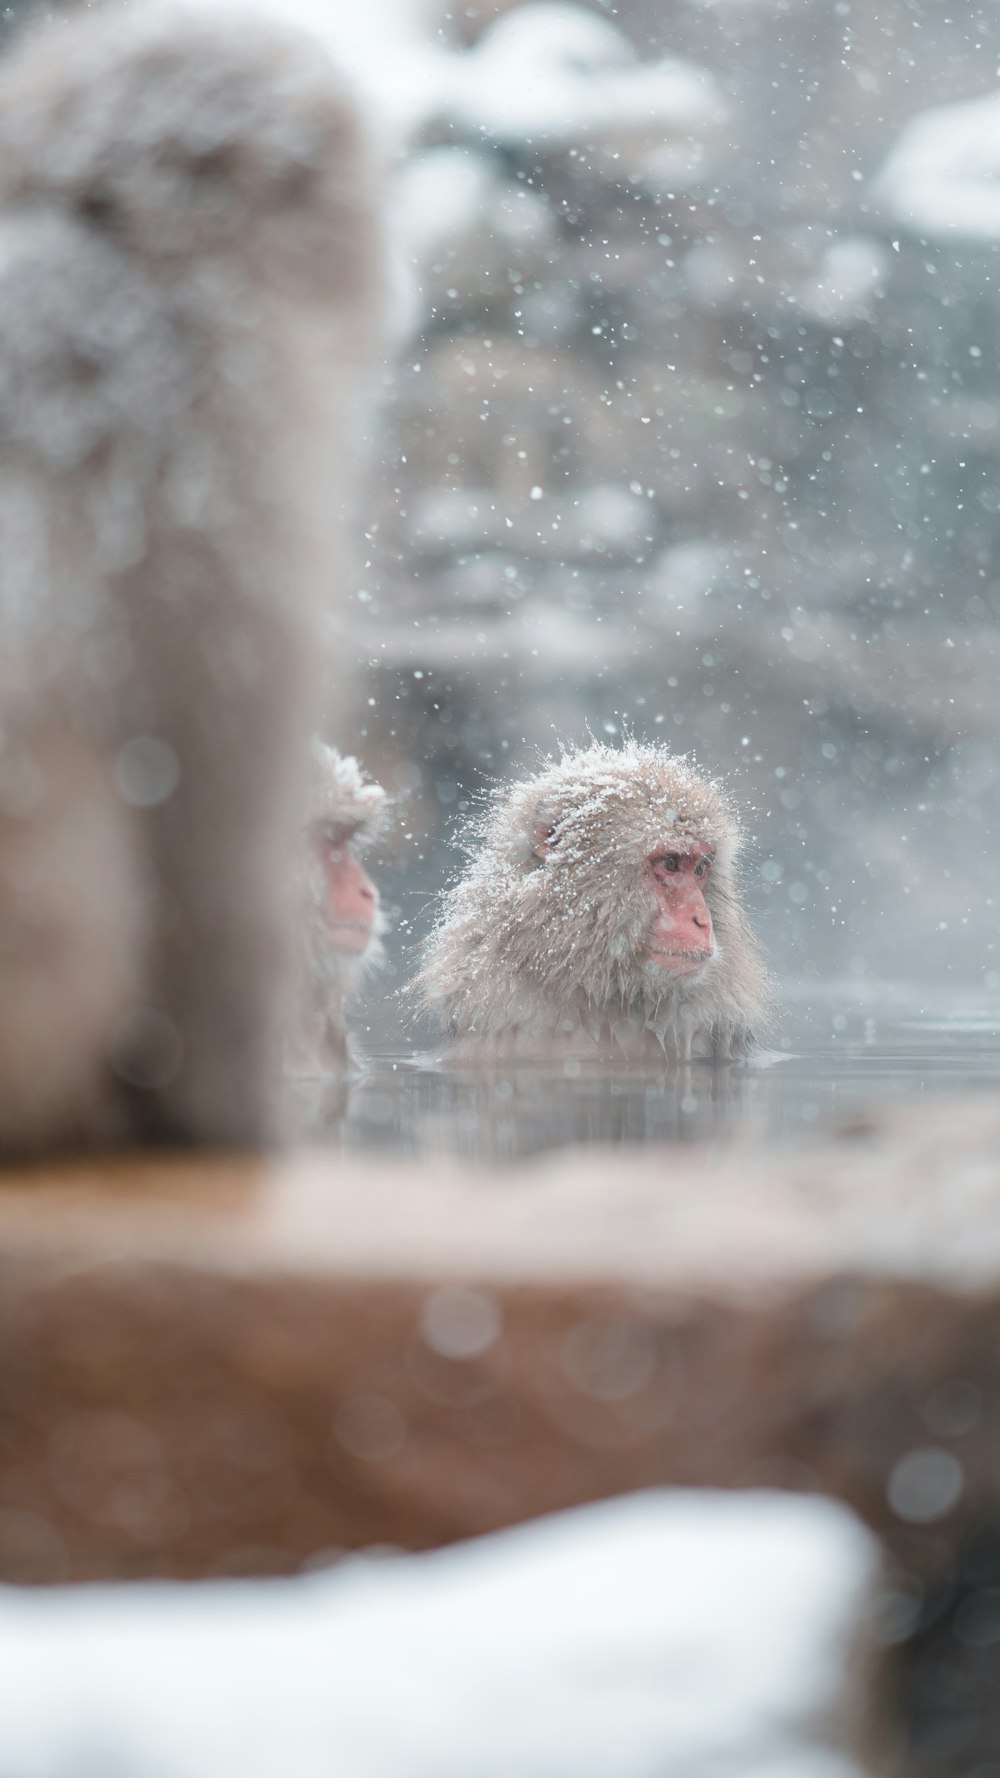 a snow monkey in a hot tub in the snow